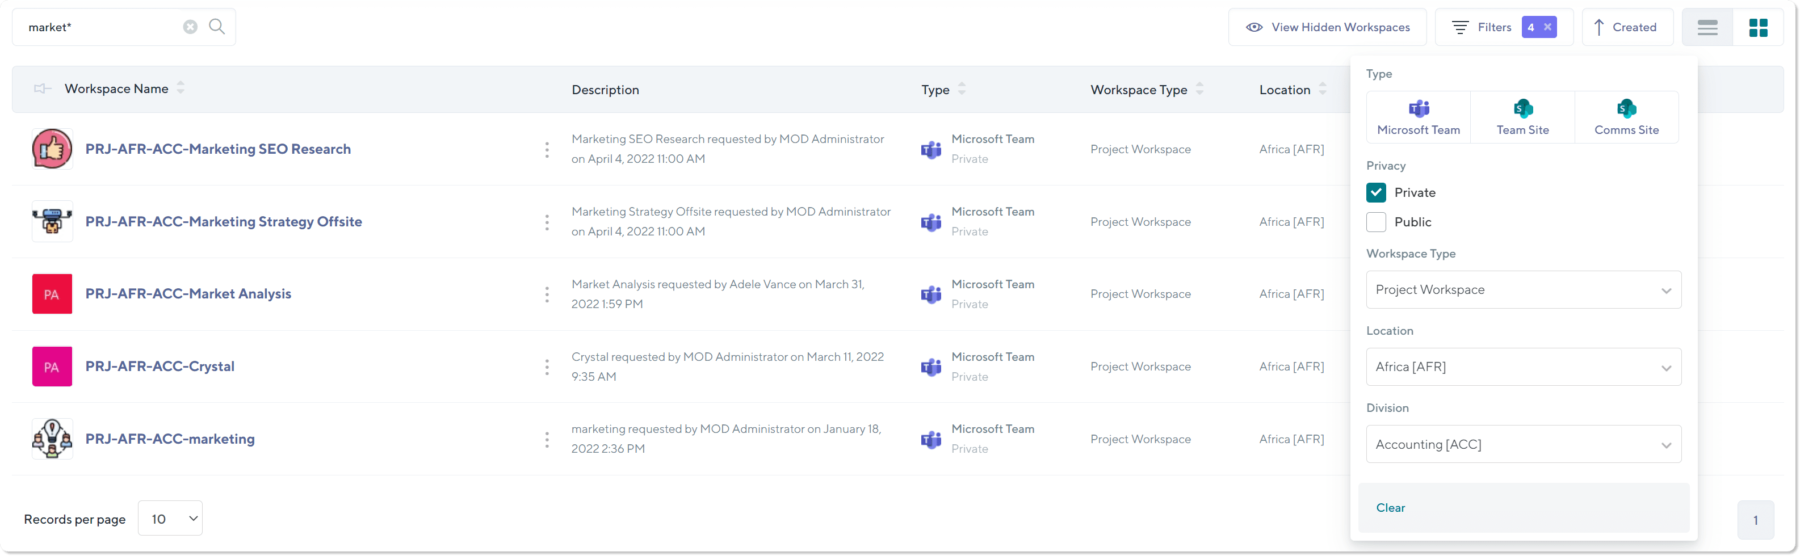 microsoft teams naming - orchestry intelligent workspace directory